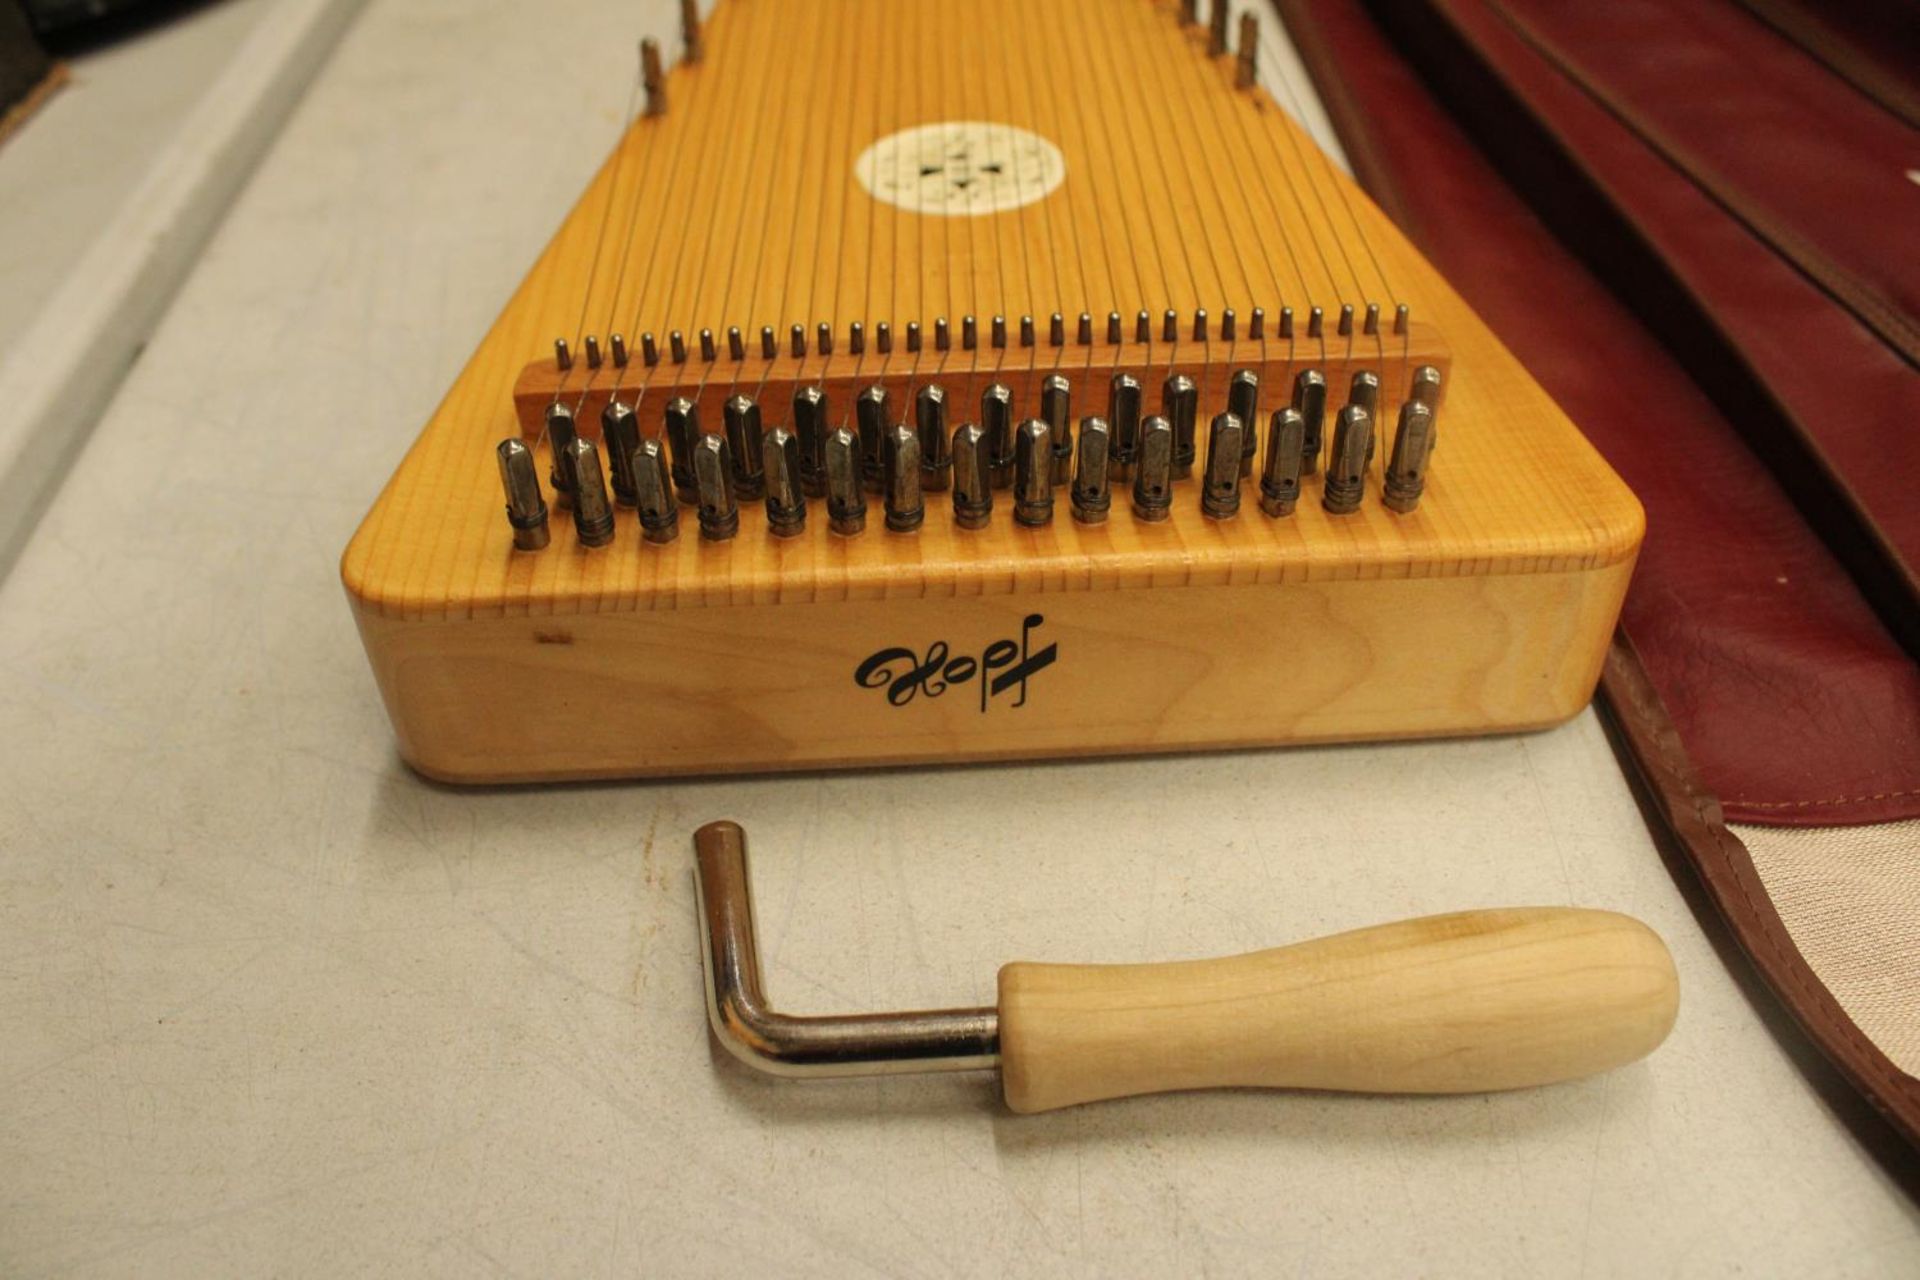 A HOPF PSALTERY WITH TUNING KEY AND STORAGE BAG - Image 2 of 3